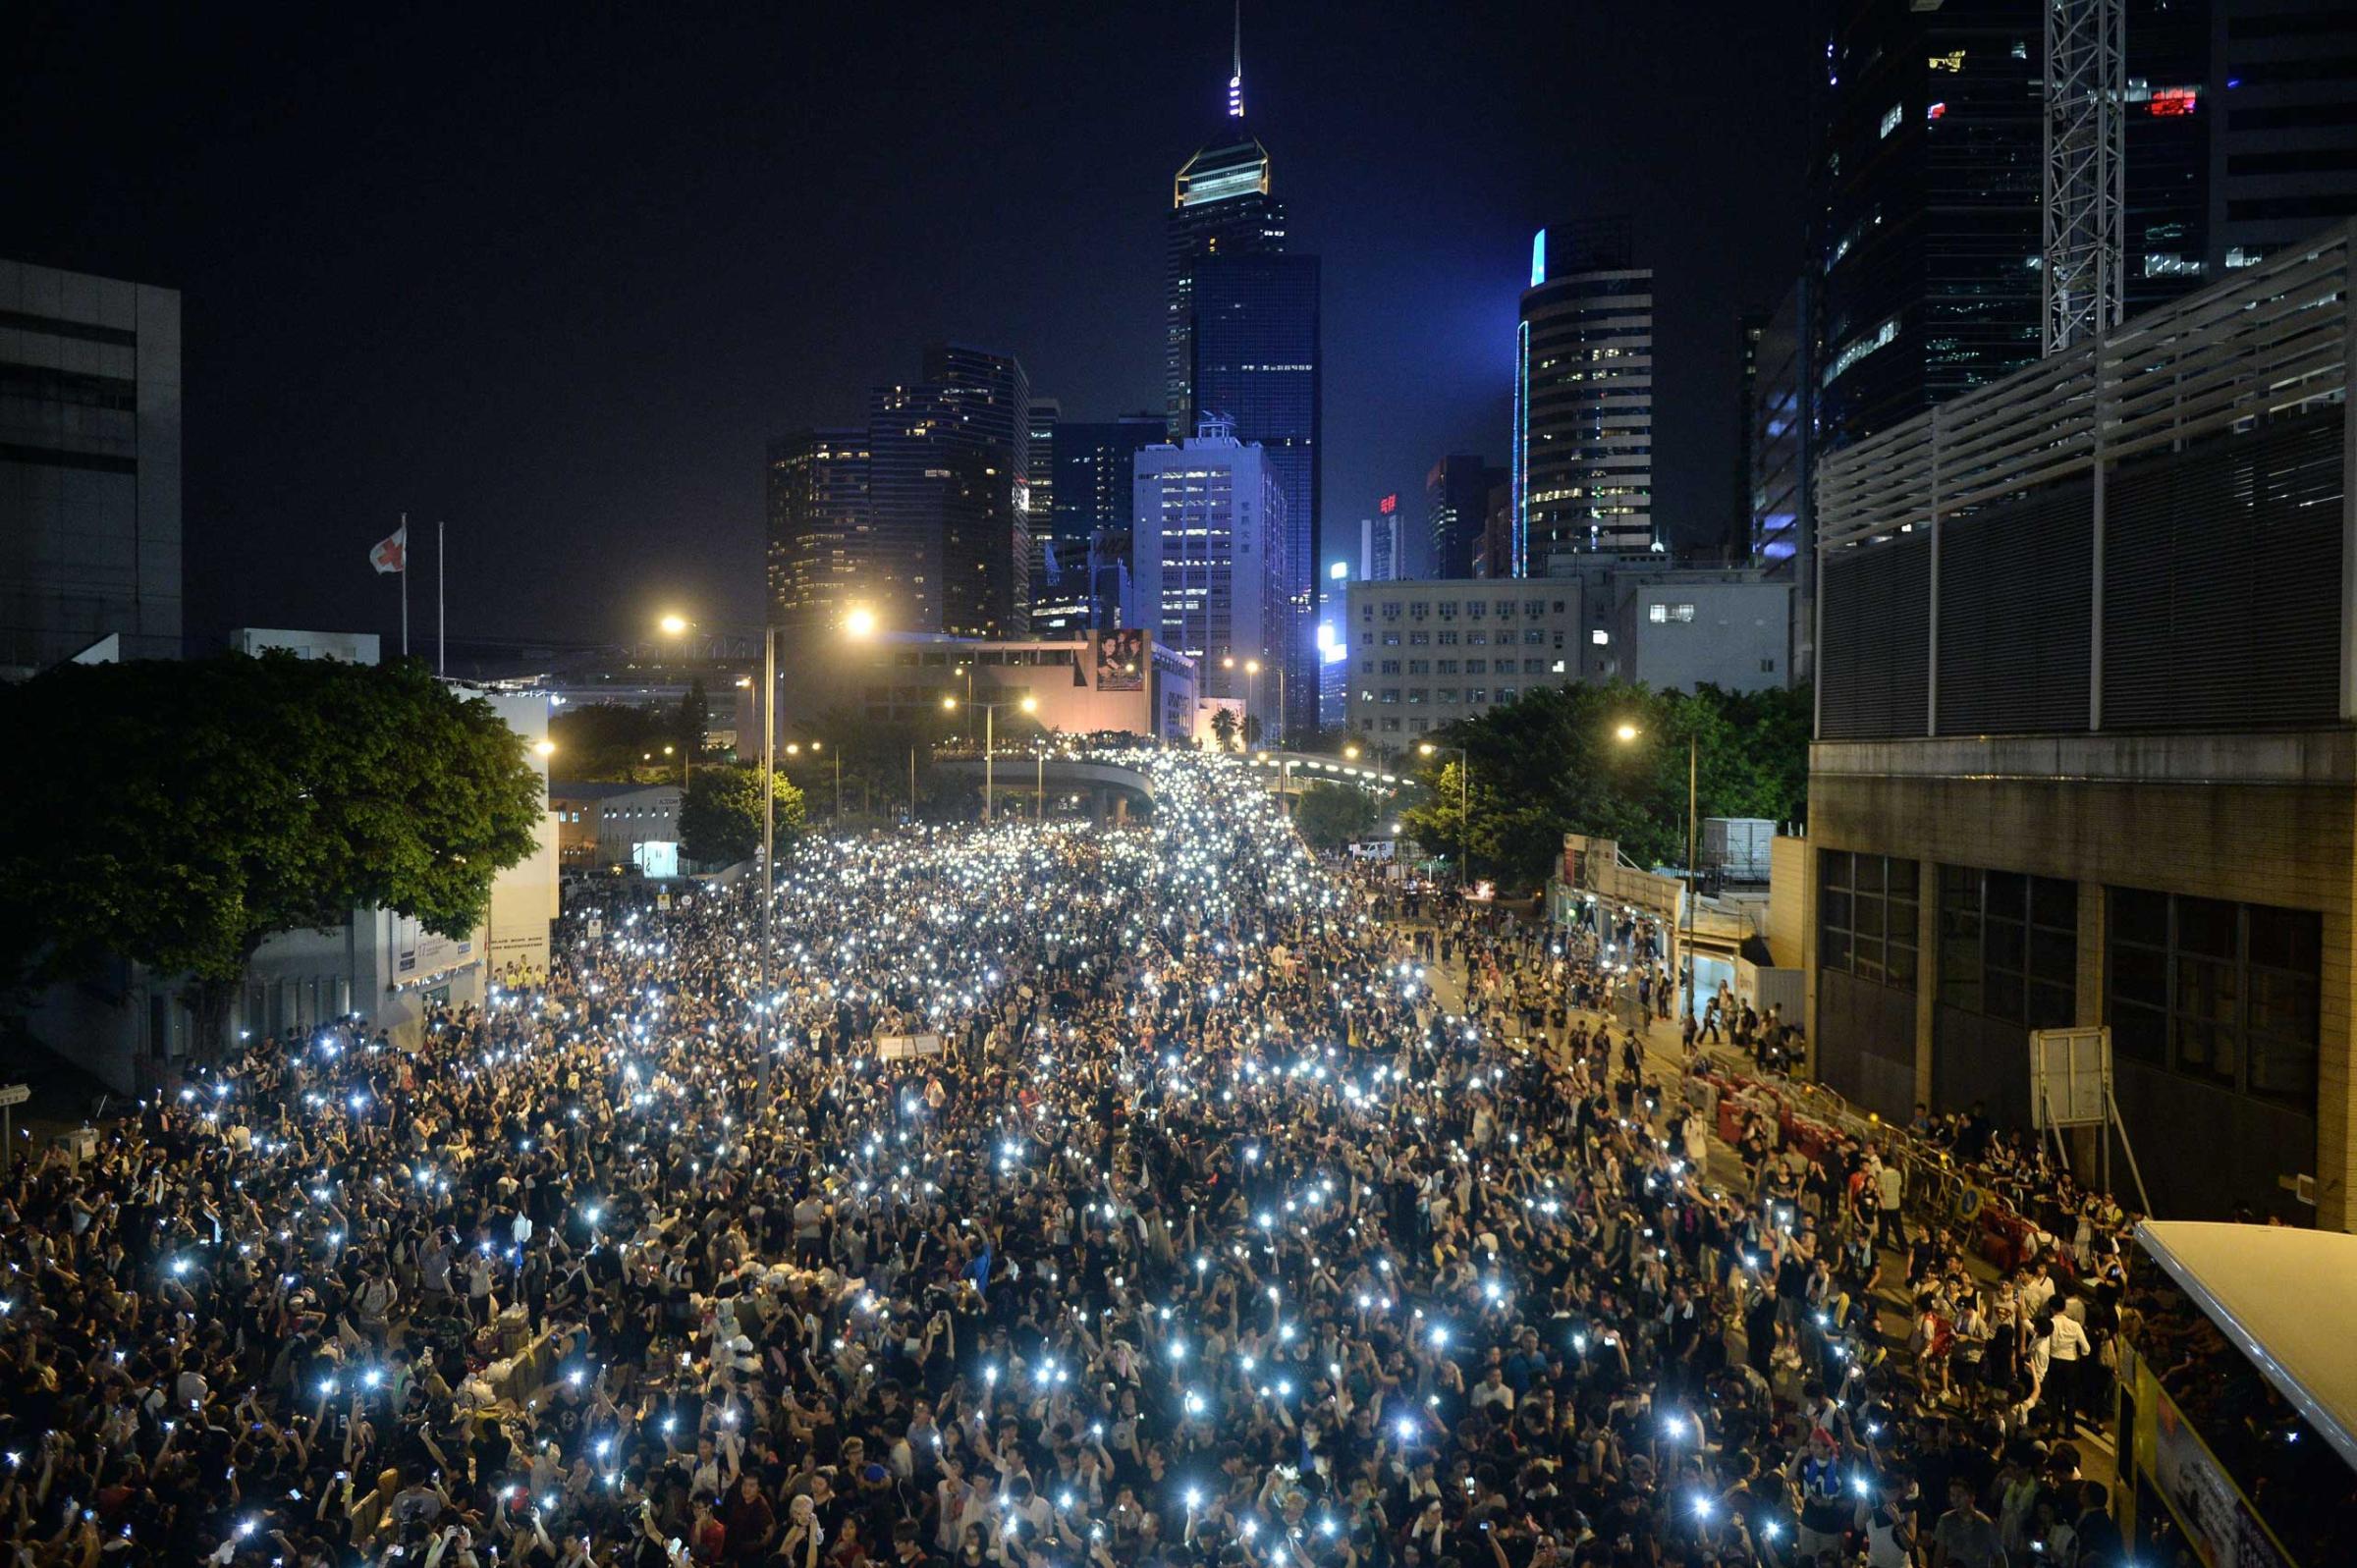 Pro-democracy demonstrators hold up their mobile phones during a protest near the Hong Kong government headquarters on Sept. 29, 2014.